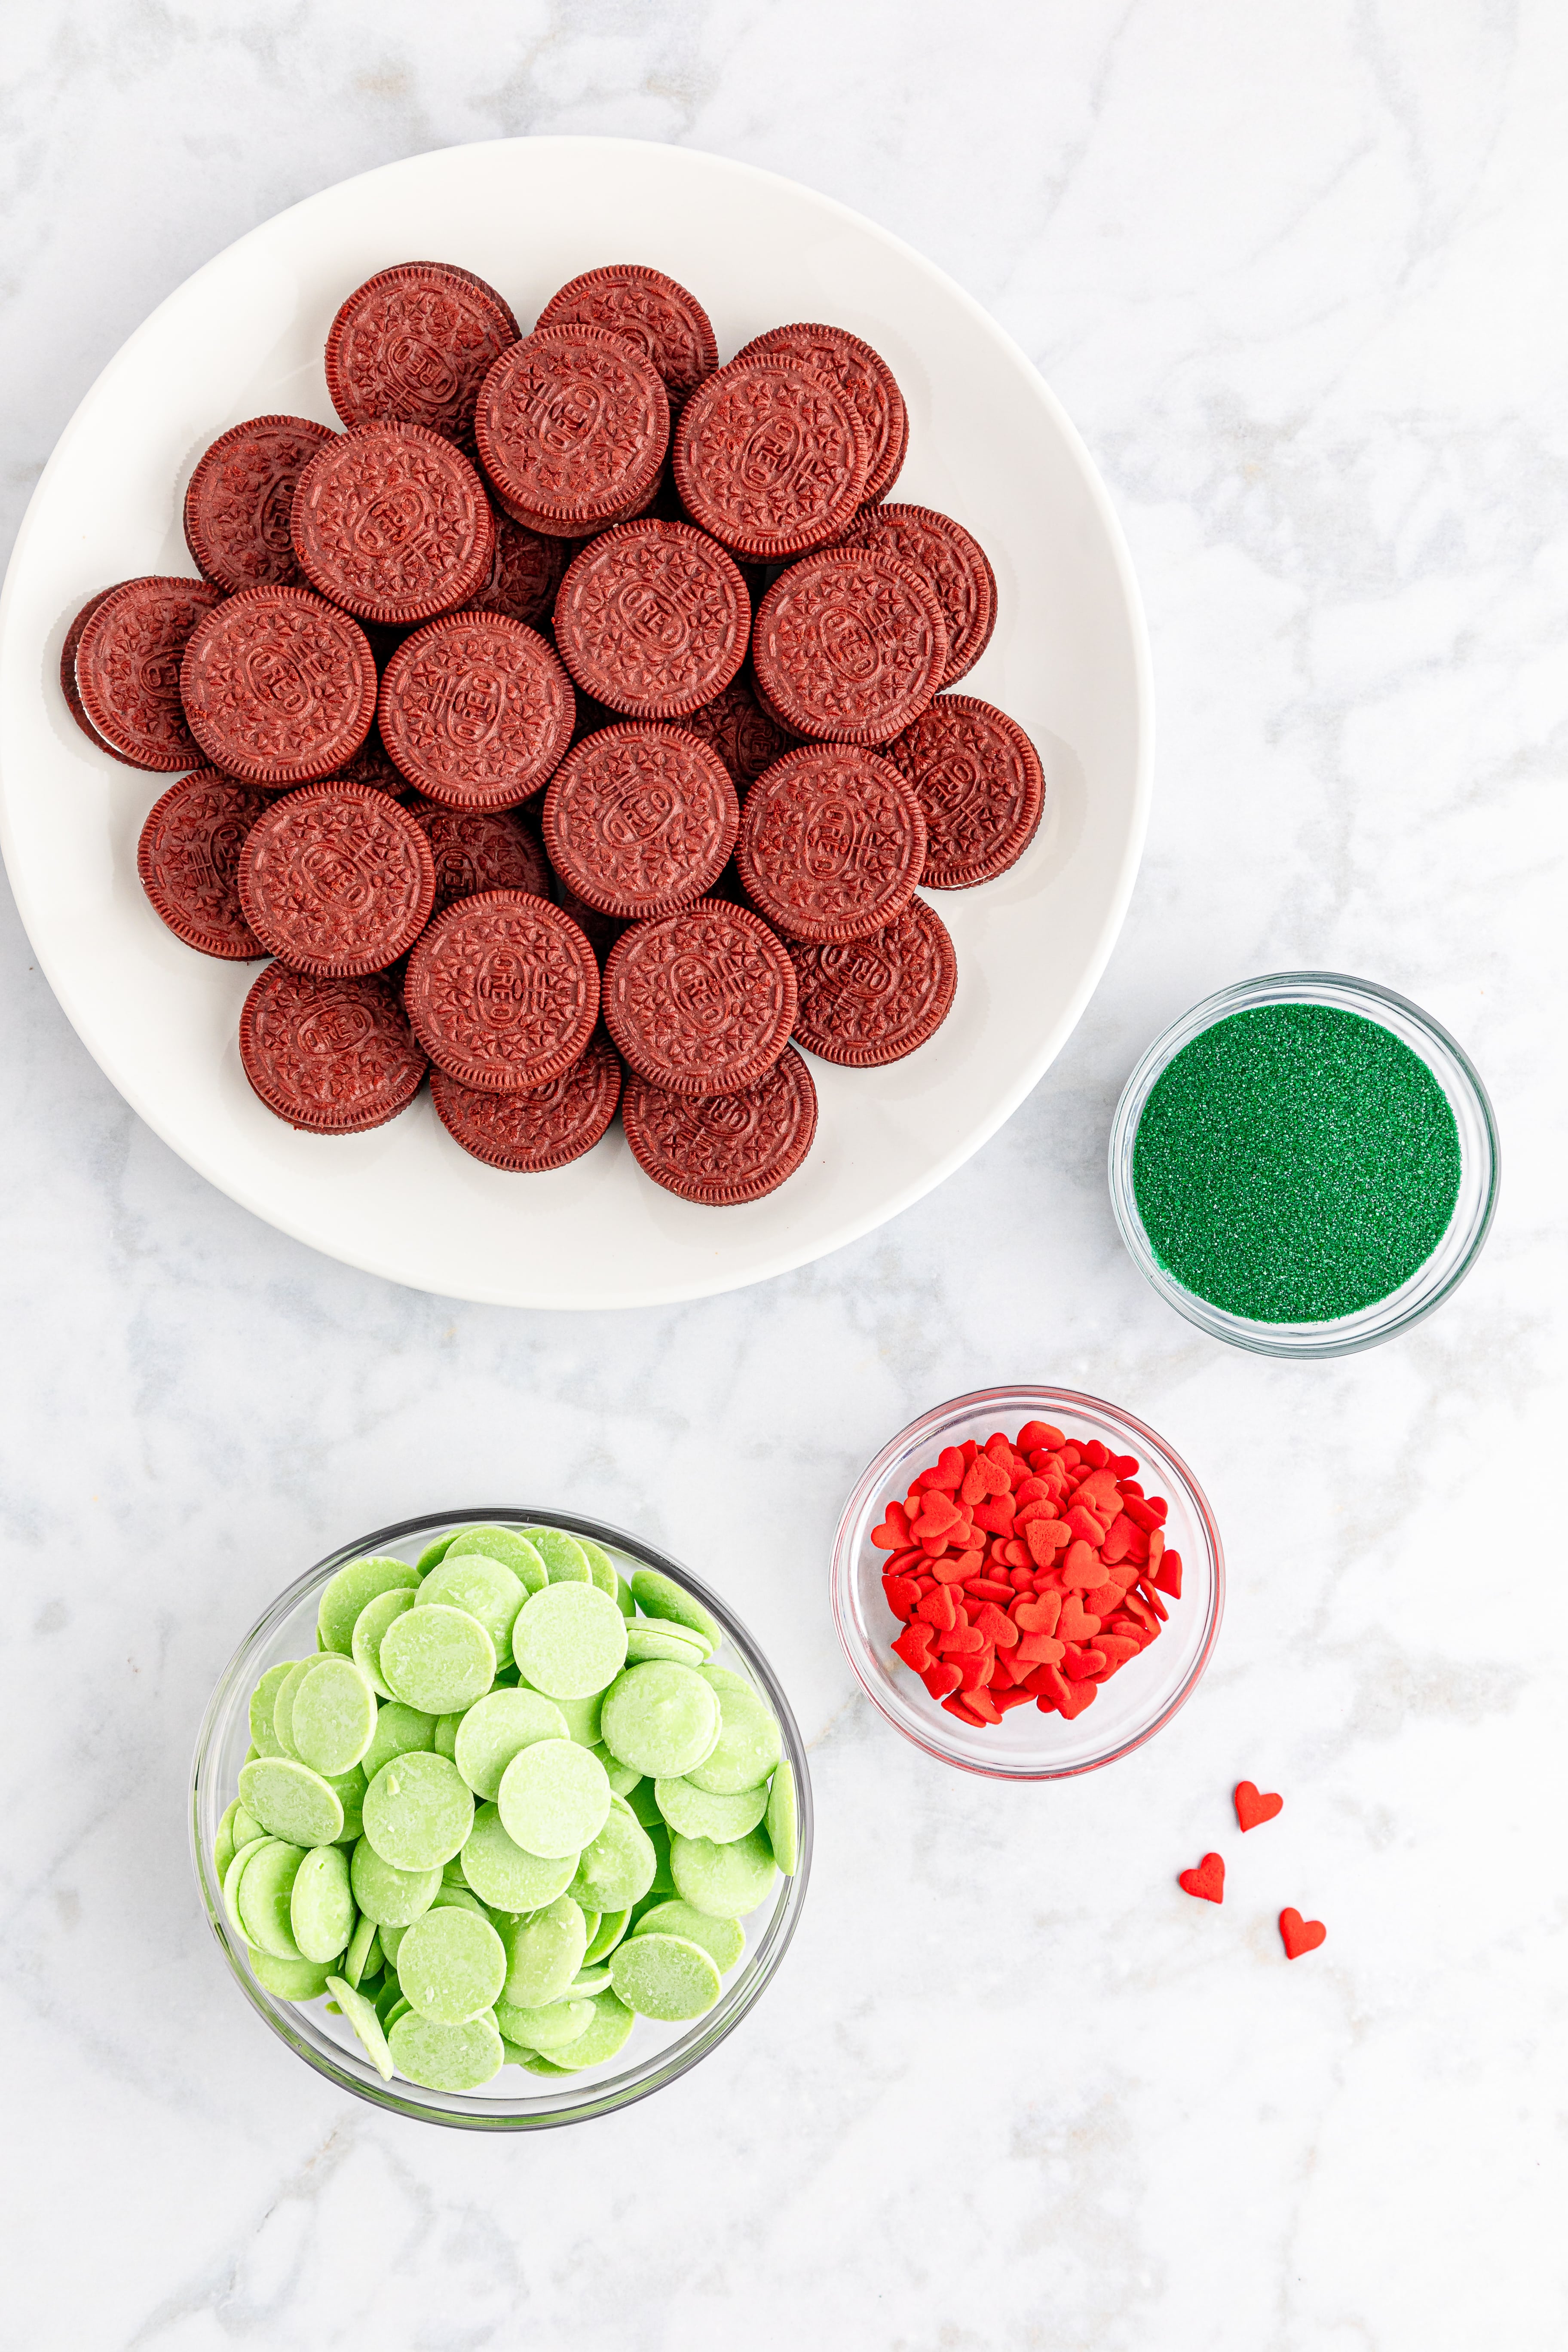 Red velvet Oreos, green sprinkles, red candy hearts and light green candy melts on marble counter